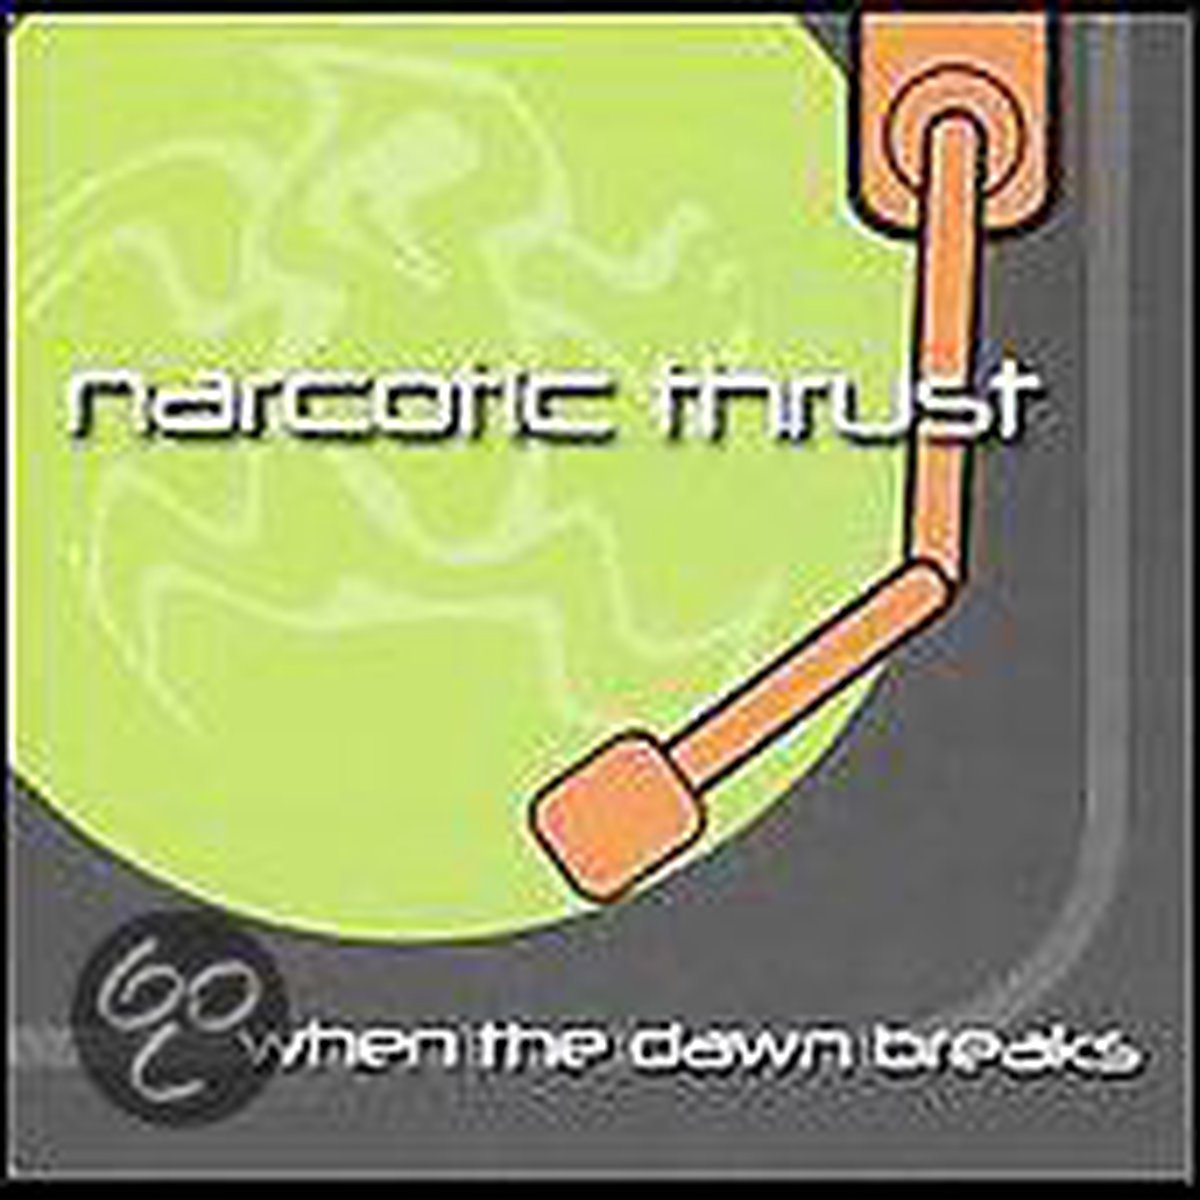 When The Dawn Breaks - Narcotic Thrust